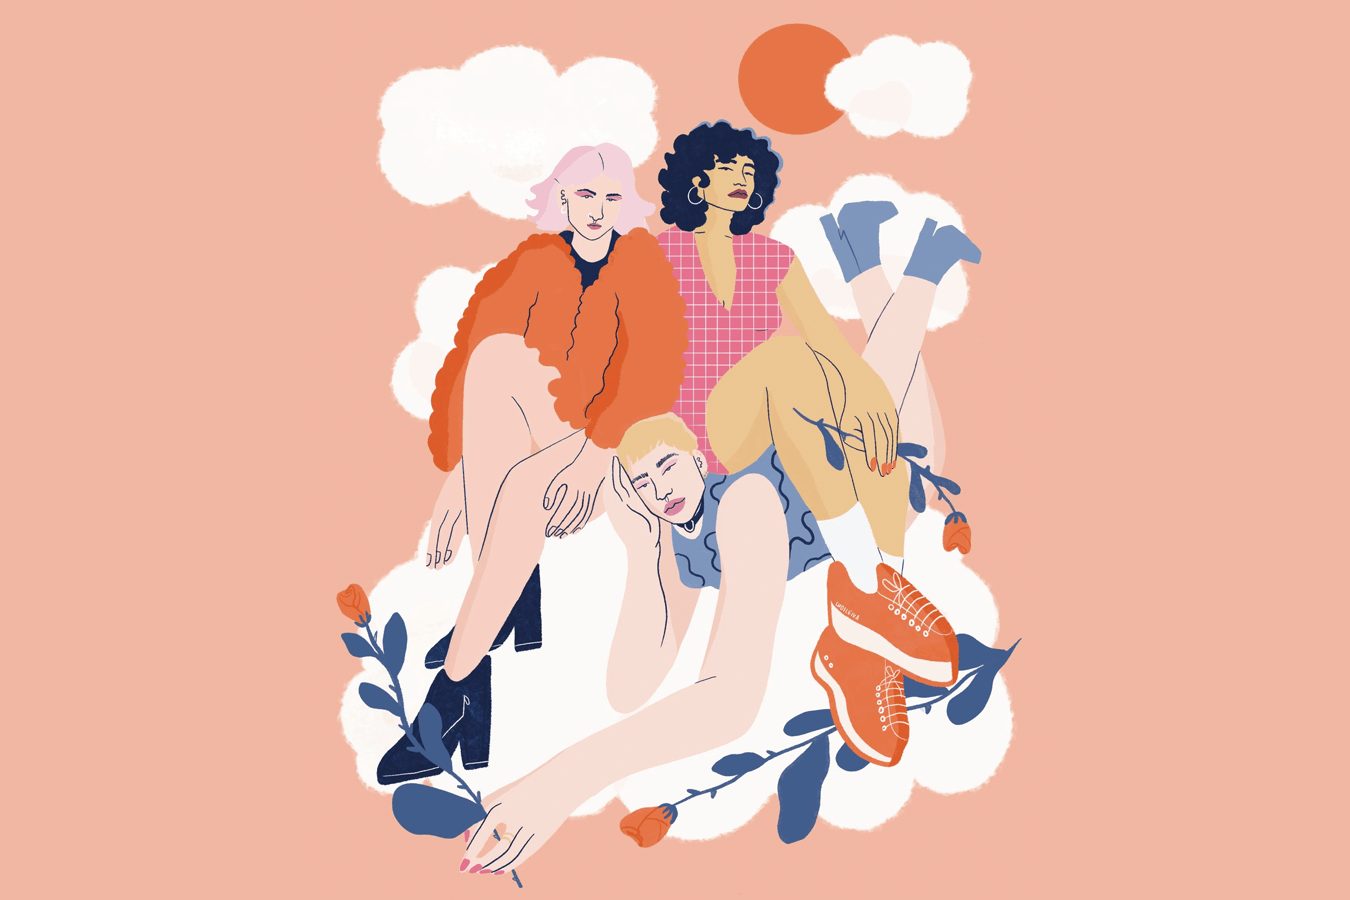 Young people illustration with clouds and roses.